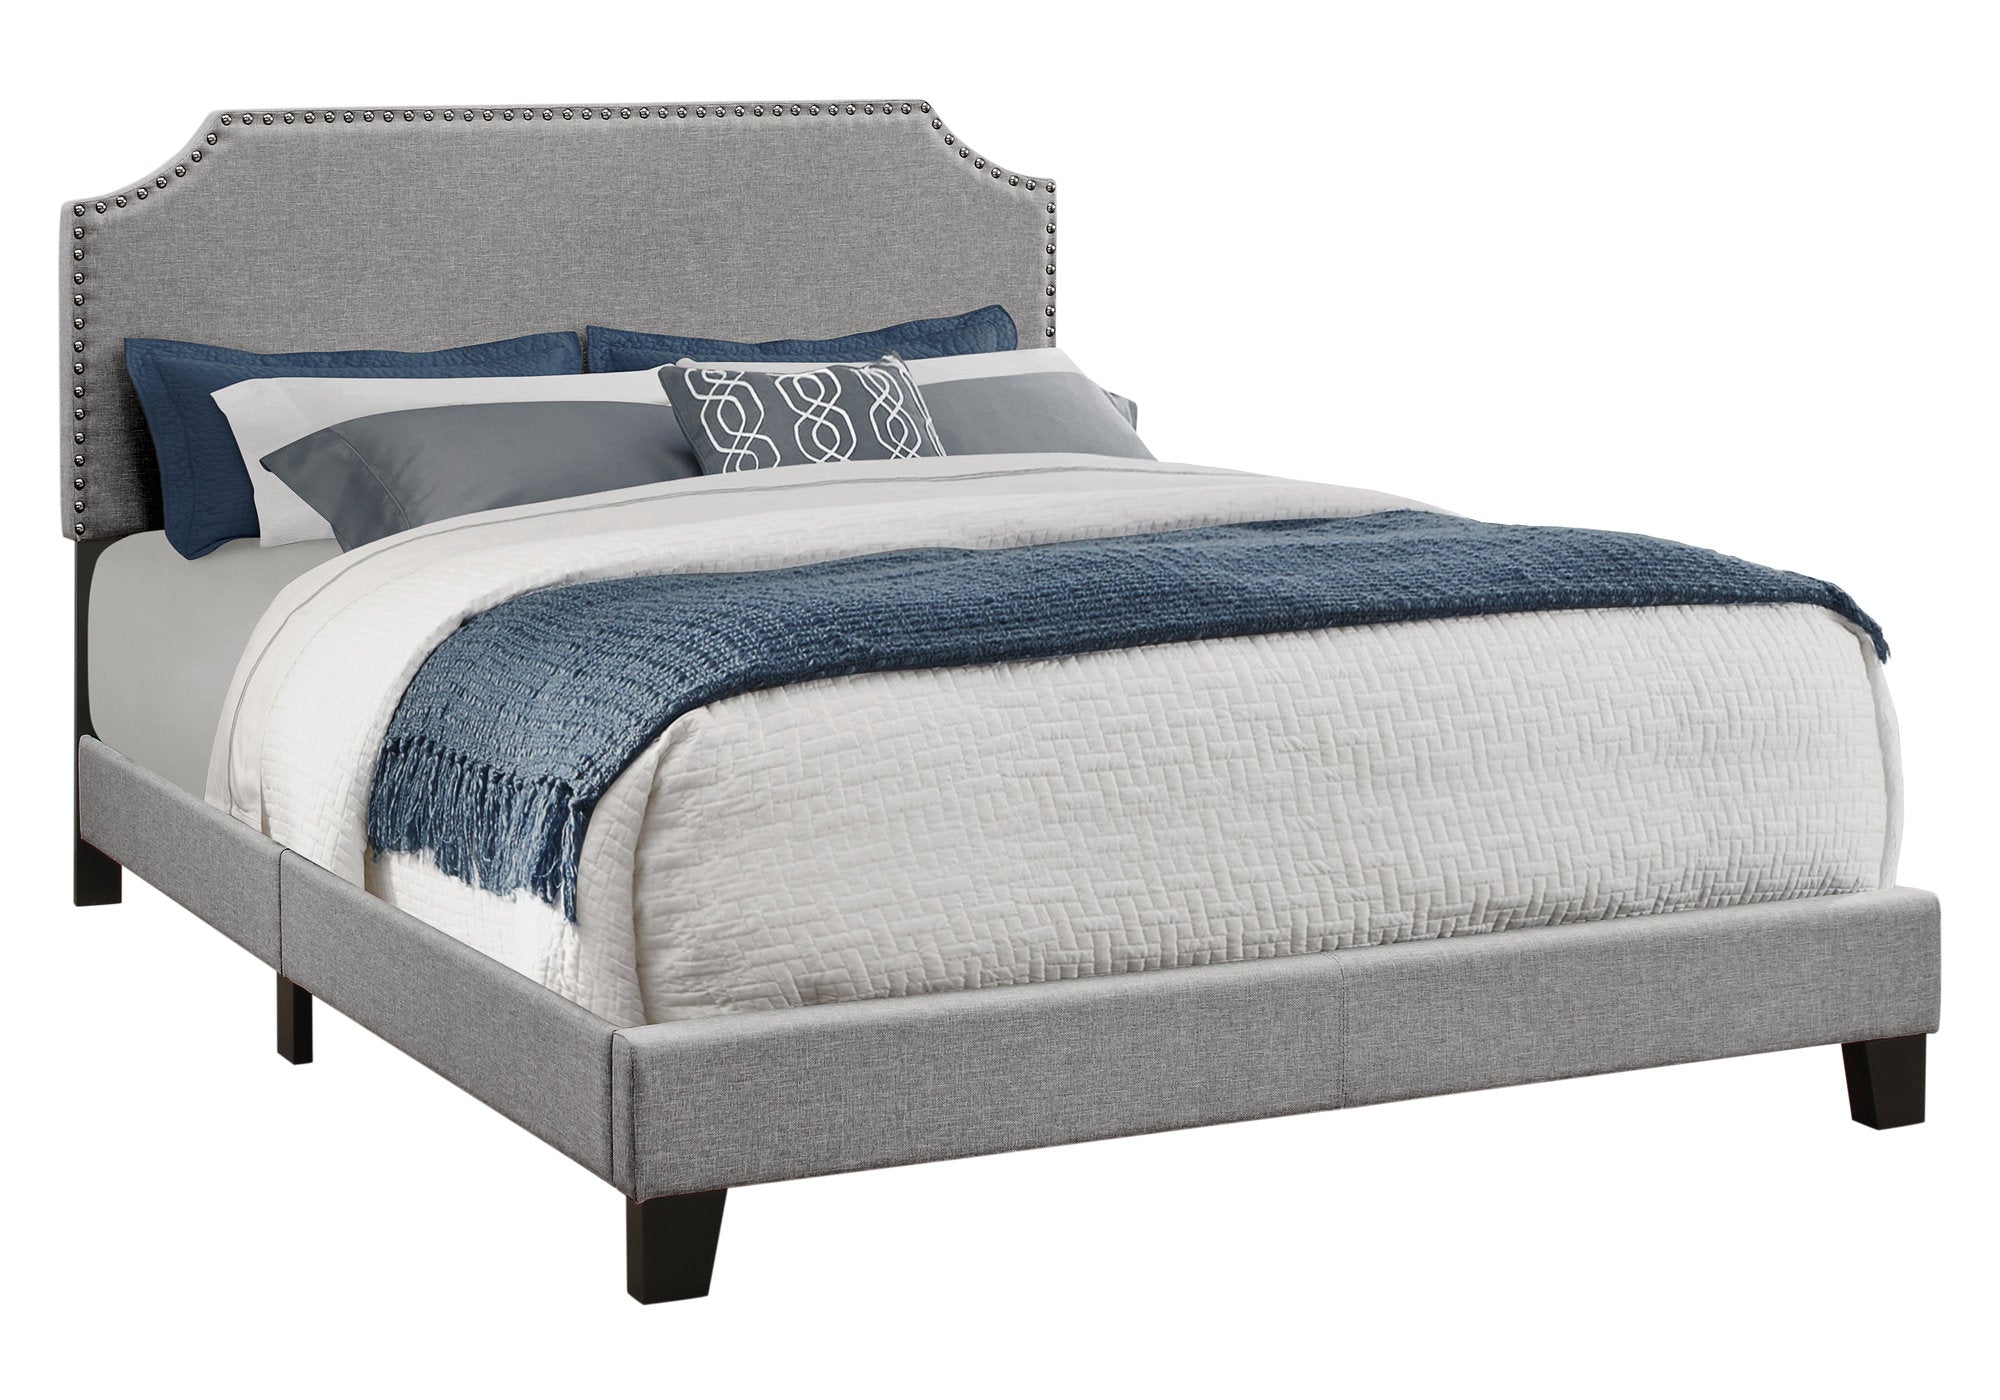 Bed - Queen Size / Grey Linen With Chrome Trim